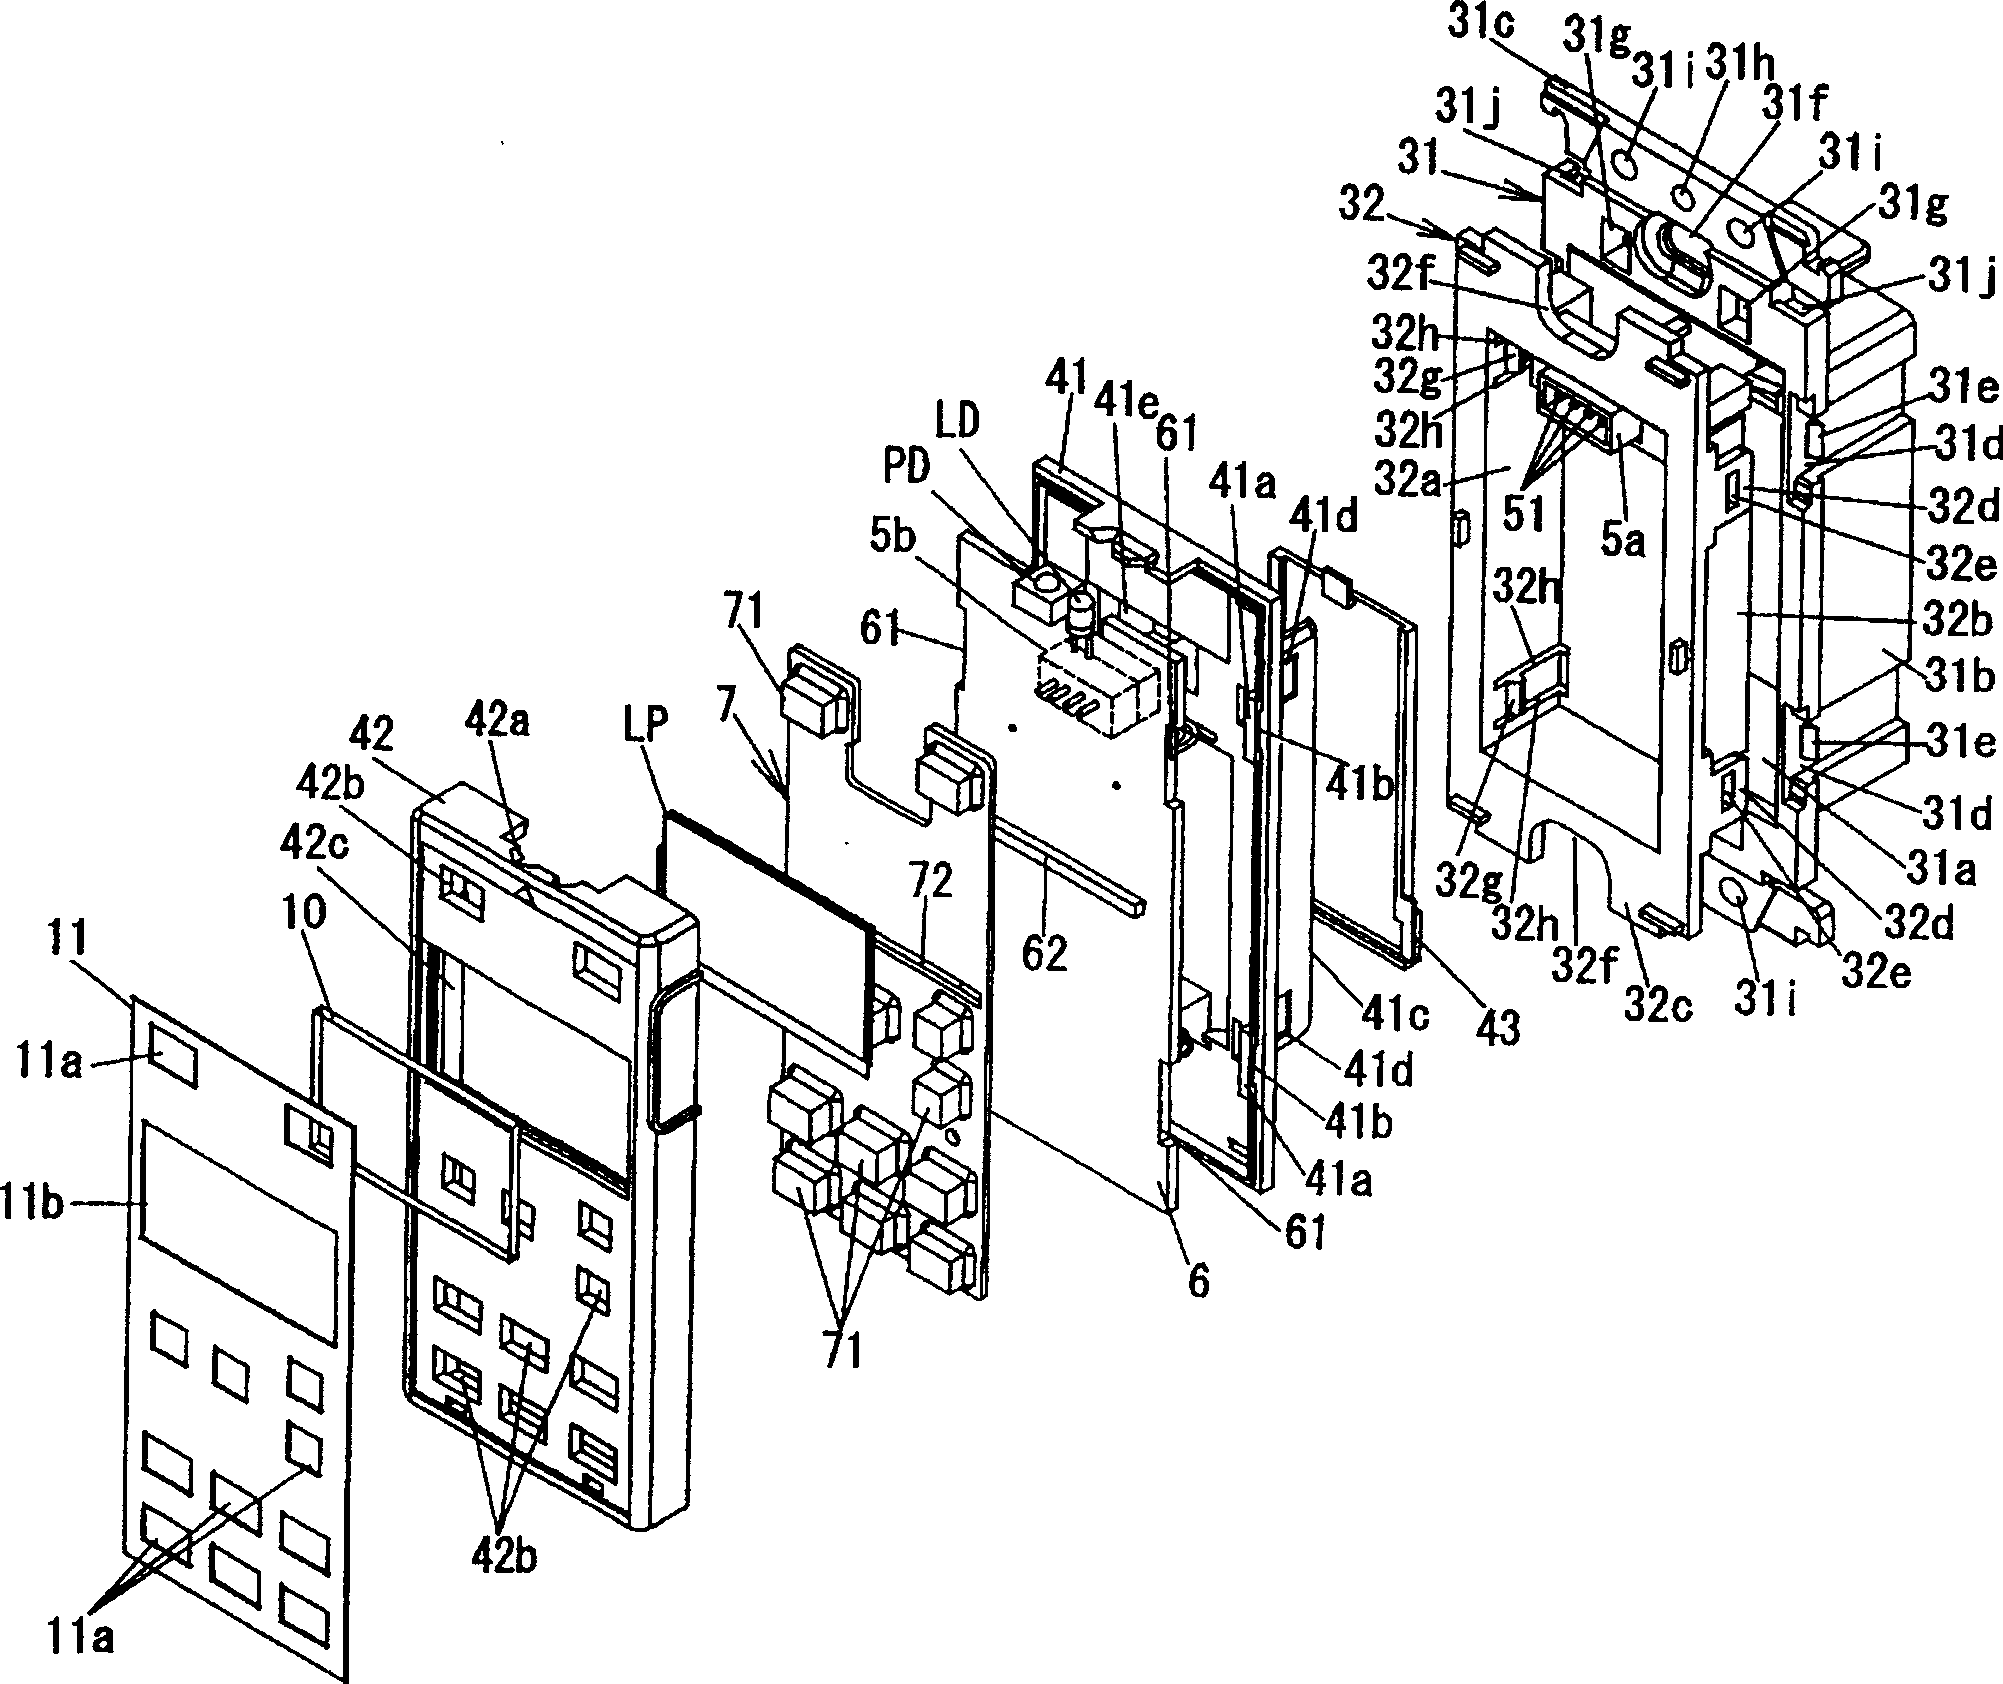 Setting apparatus for remote monitoring and control system